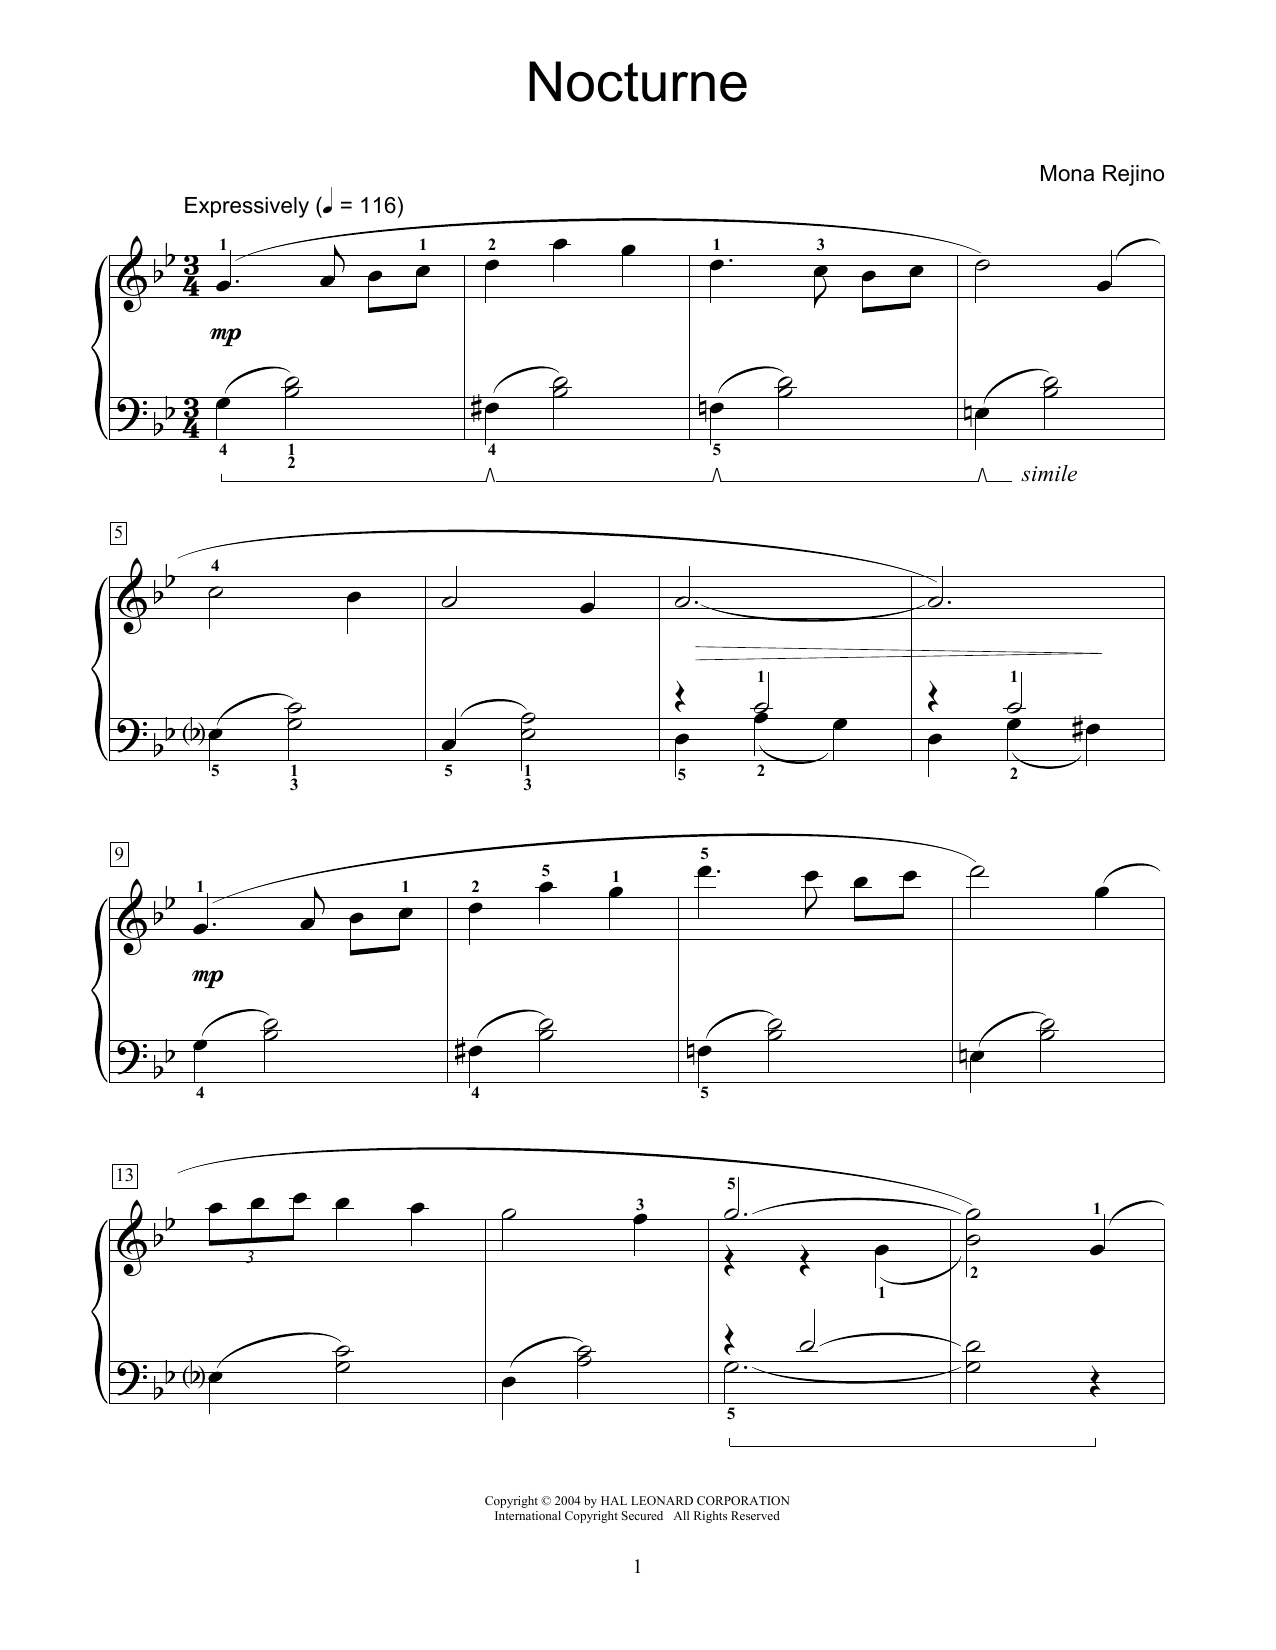 Mona Rejino Nocturne sheet music notes and chords. Download Printable PDF.